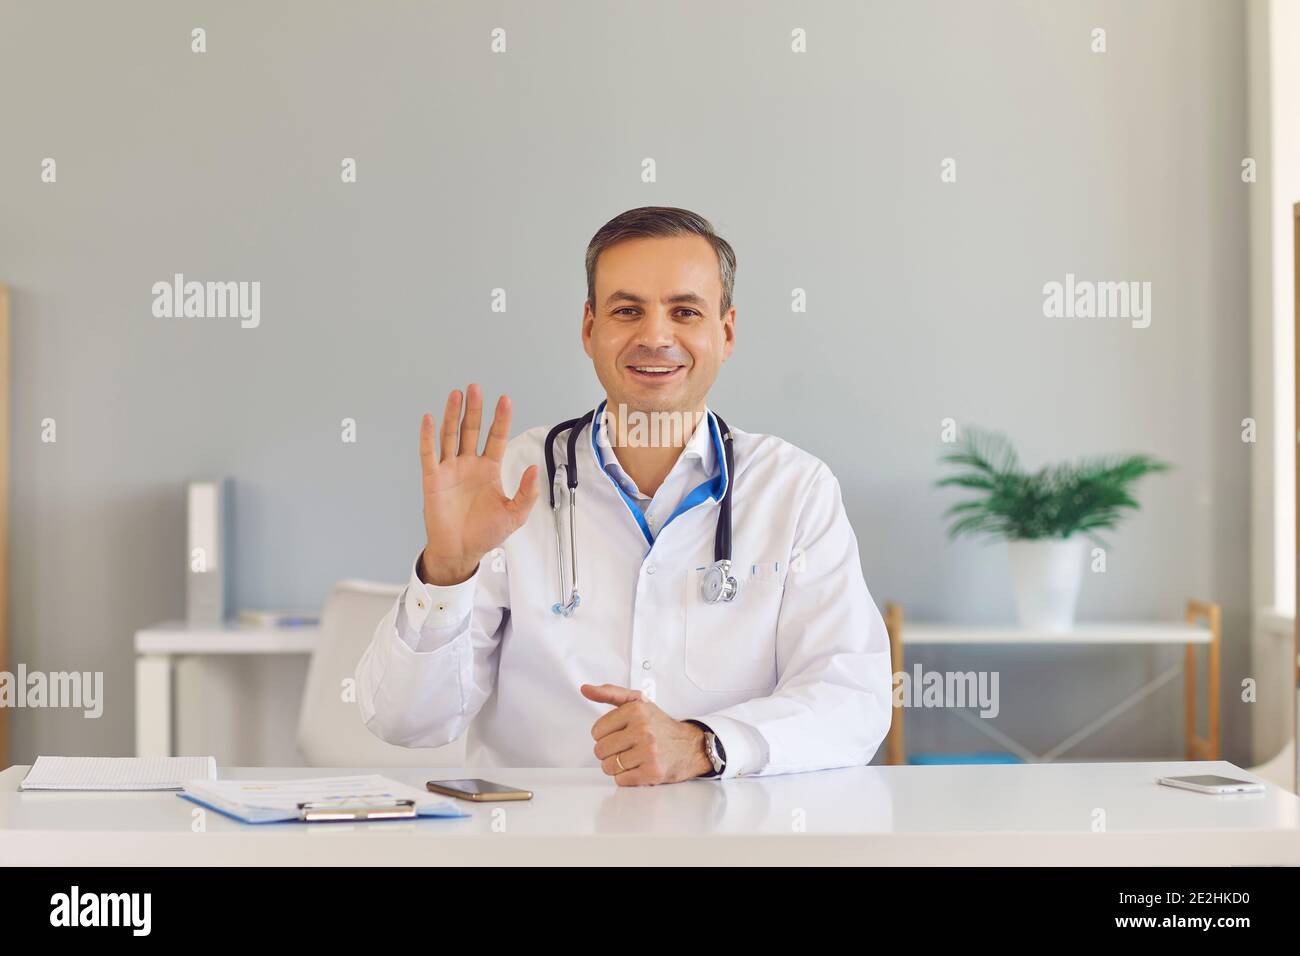 Friendly male doctor waving his hand in greeting giving an online consultation to a patient. Stock Photo